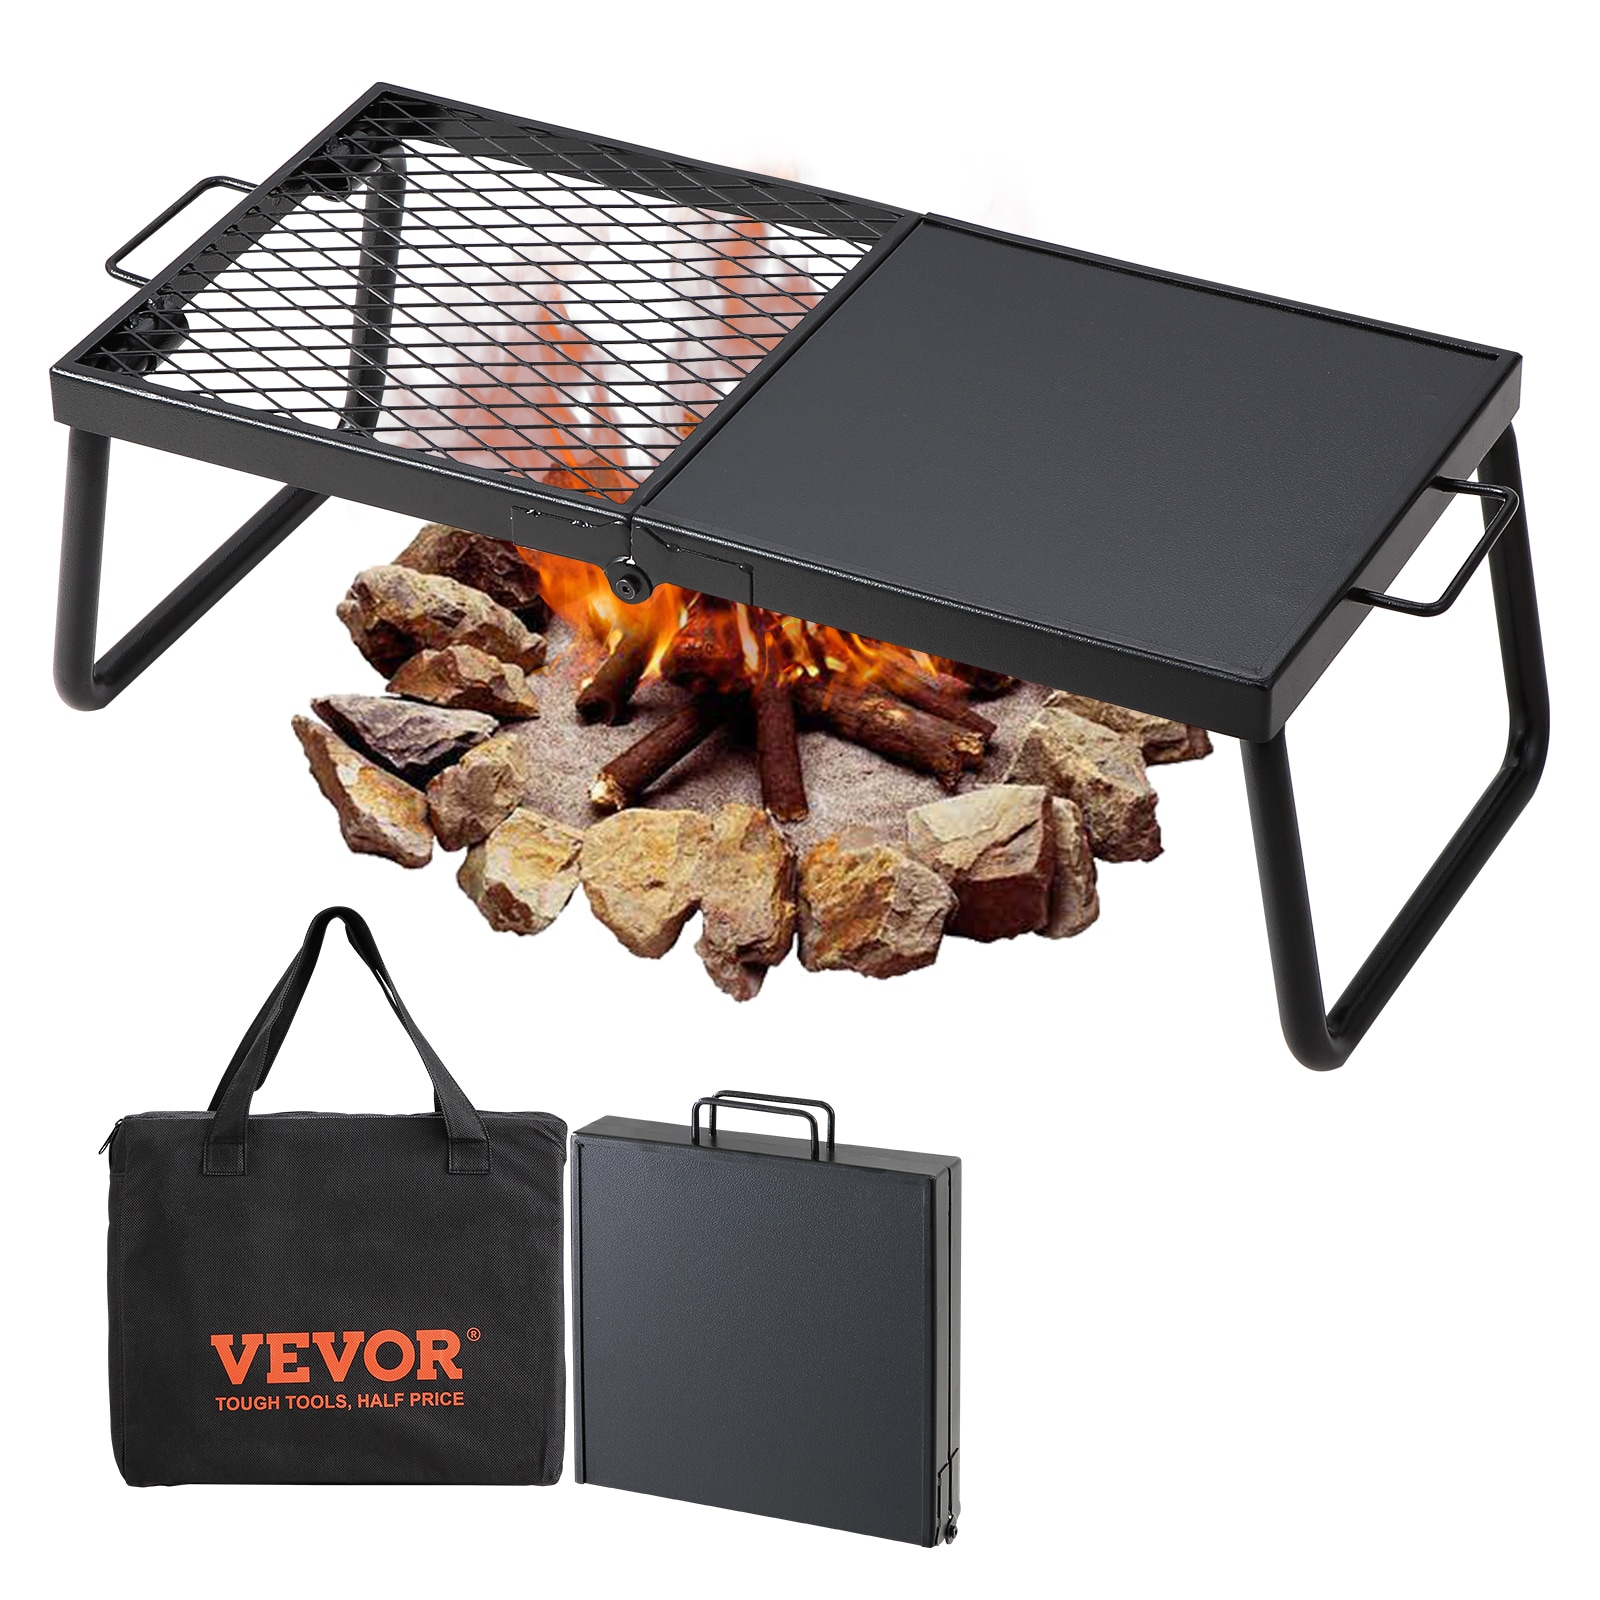 Electric Table Top Grill BBQ Barbecue Garden Camping Cooking Indoor 1300W